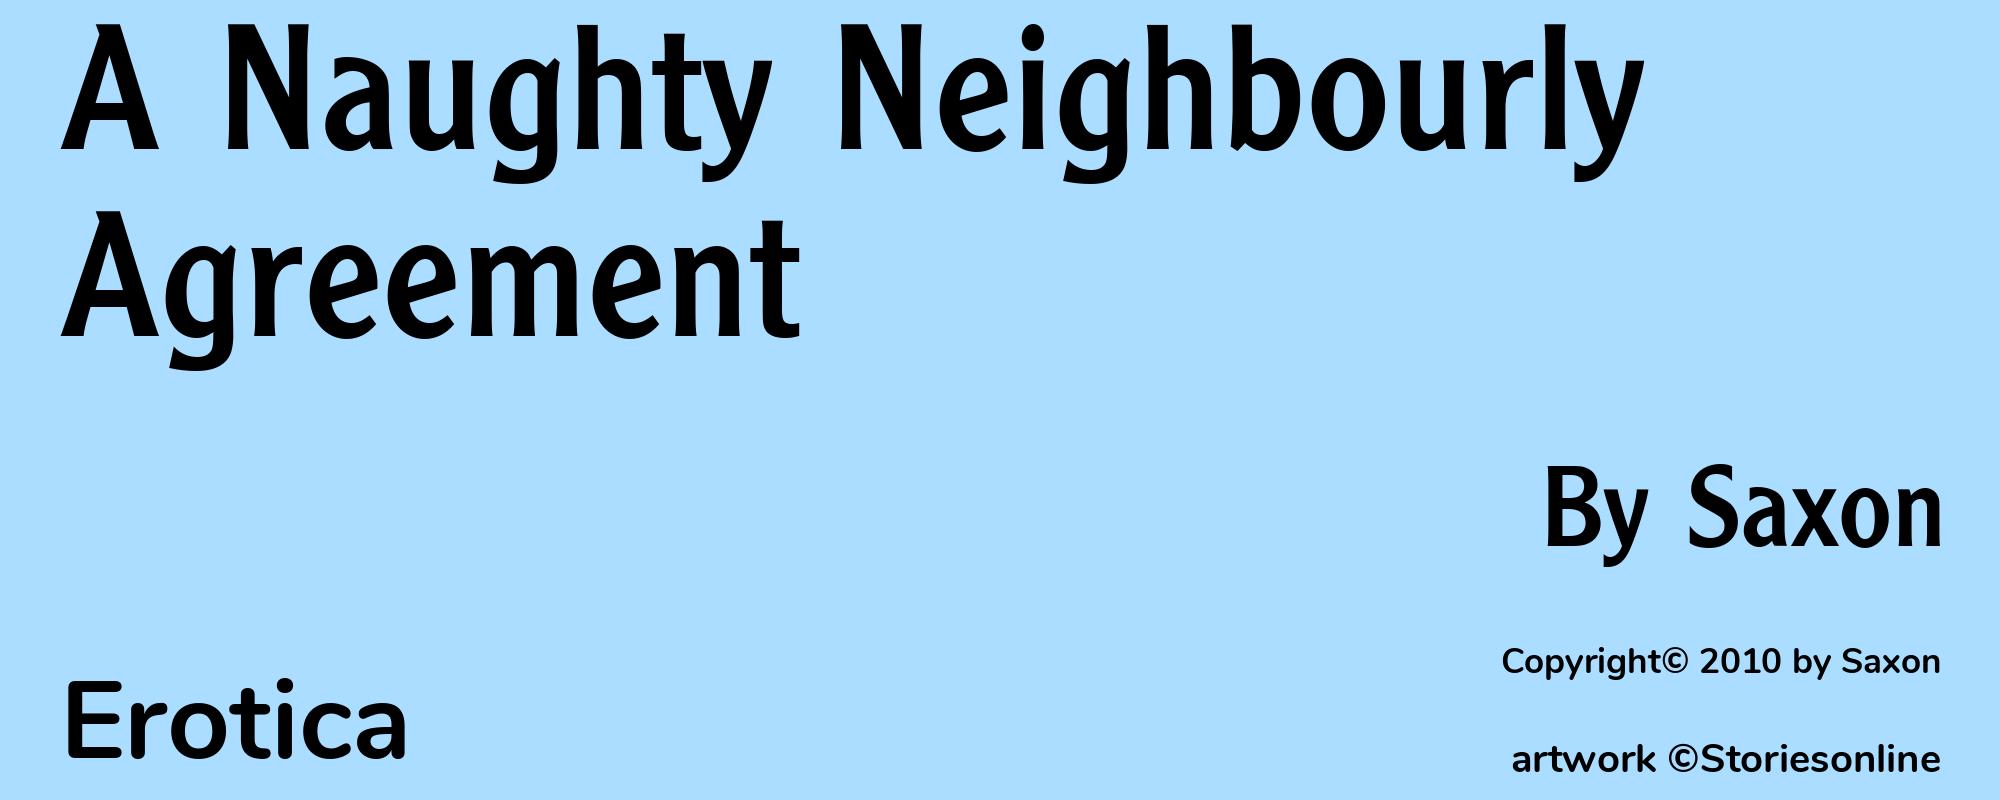 A Naughty Neighbourly Agreement - Cover